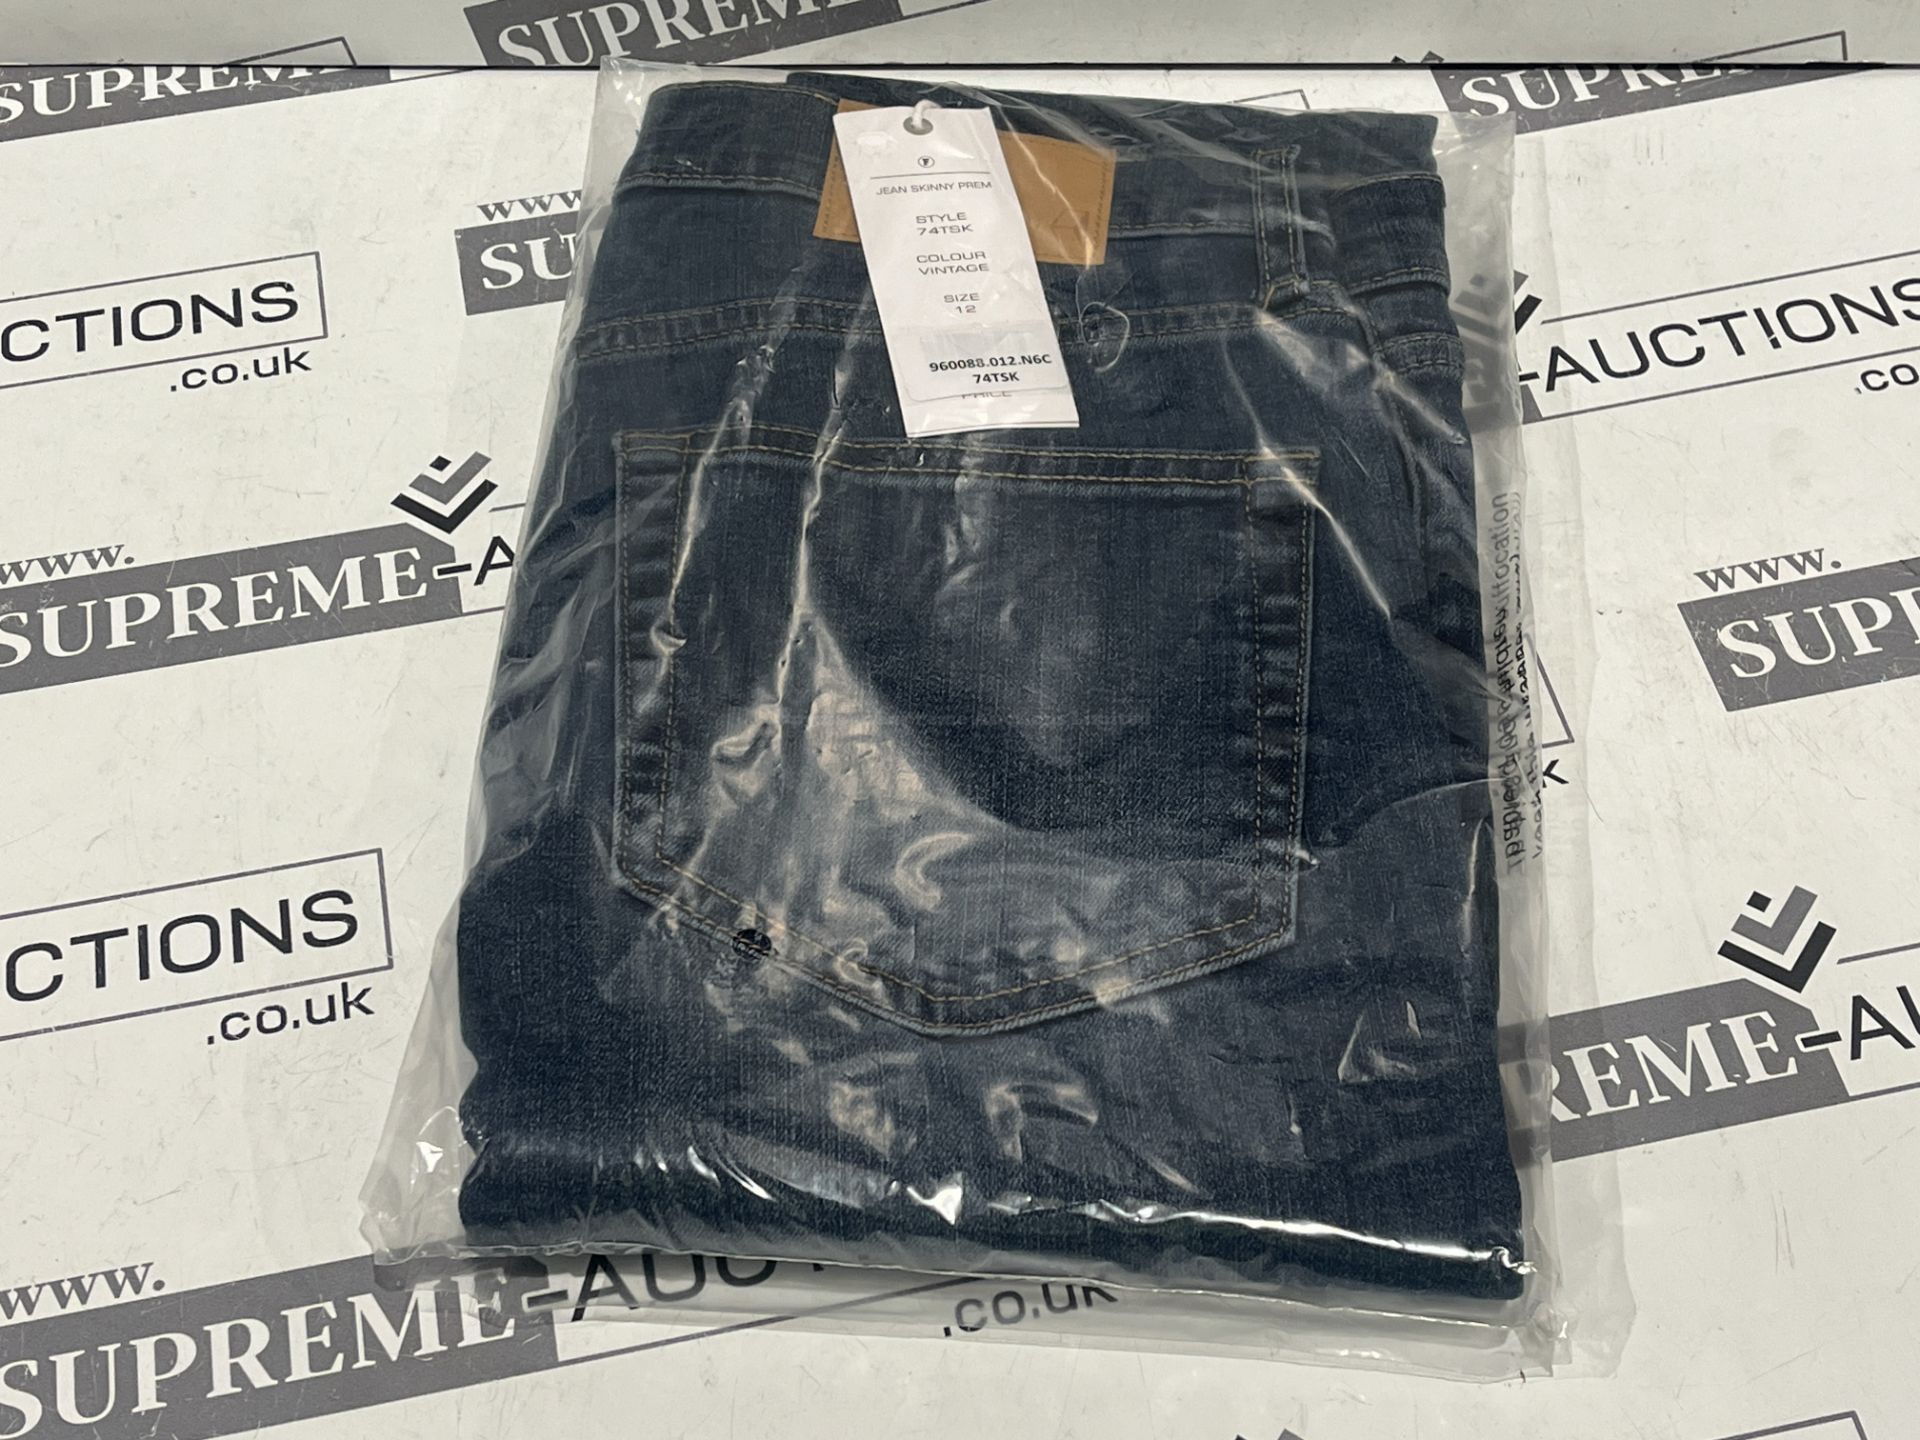 6 X BRAND NEW PAIRS OF FRENCH CONNECTION SKINNY JEANS SIZE 12 S1-10